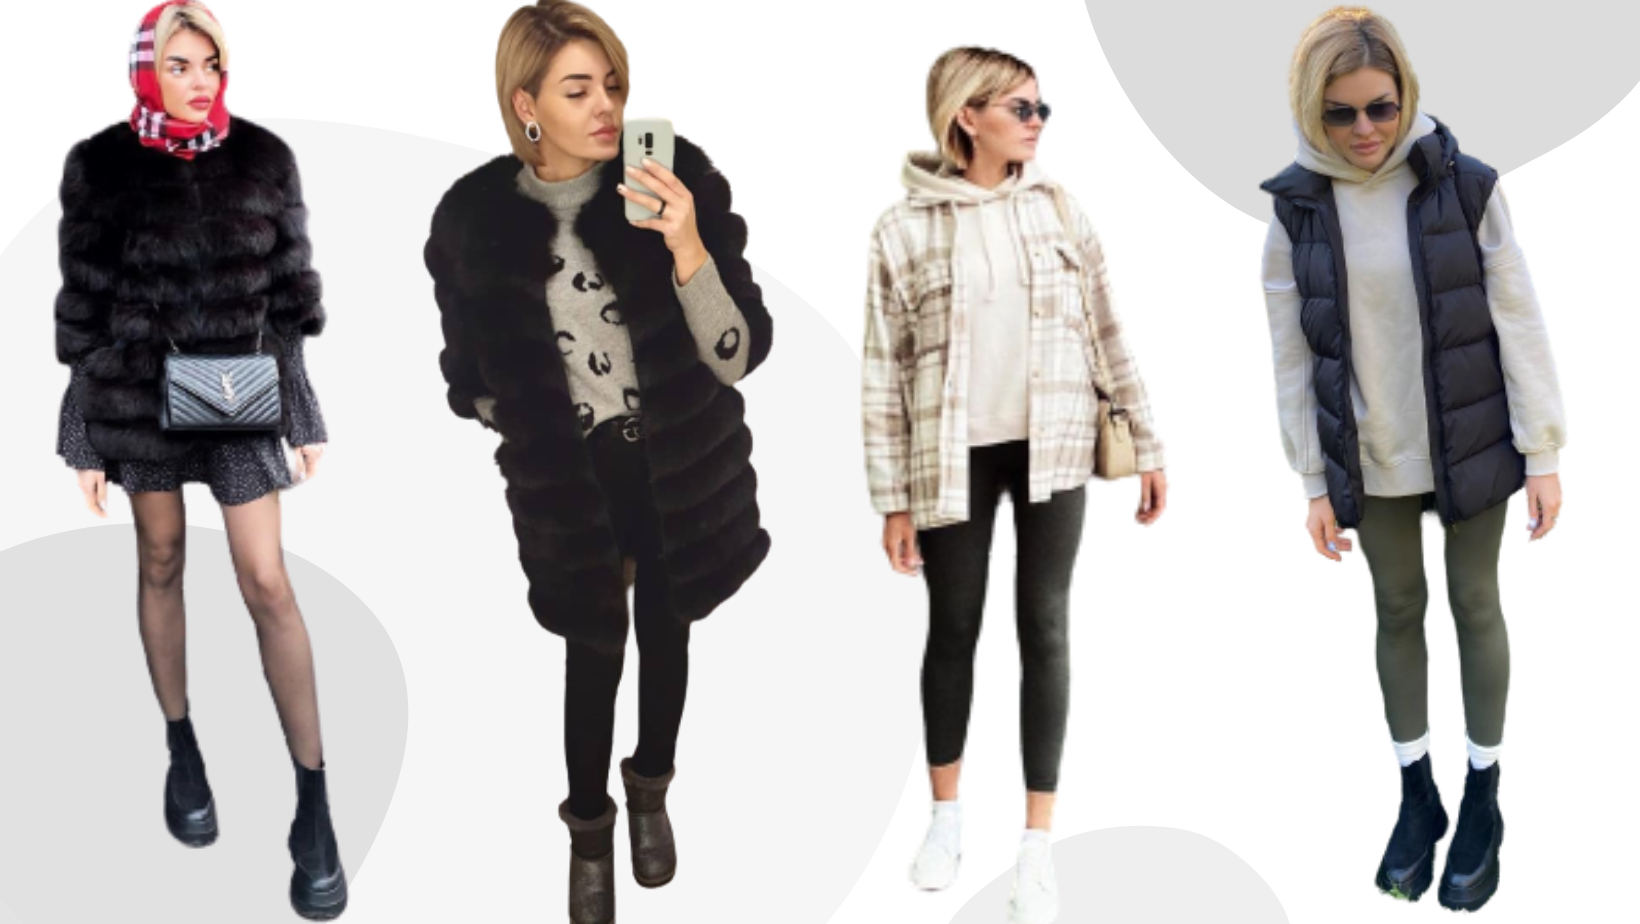 Amazing Additions To Winter Wardrobes From Urban Outfitters